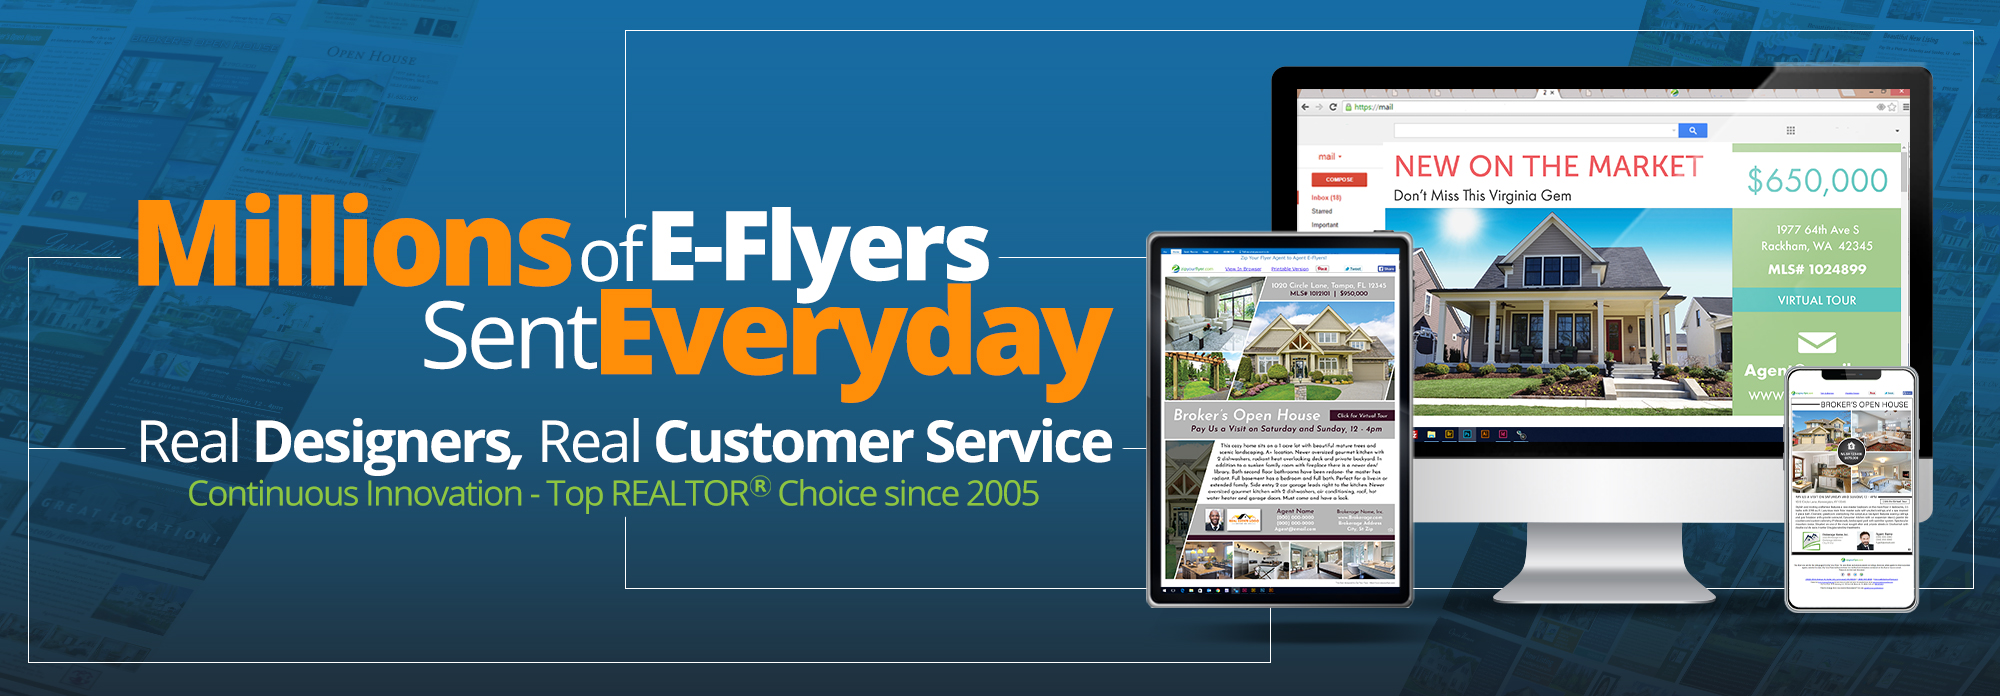 Zip Your Flyer real estate email flyer leader. Email blast other agents in your area with your new listings, price reduction, open houses and more.